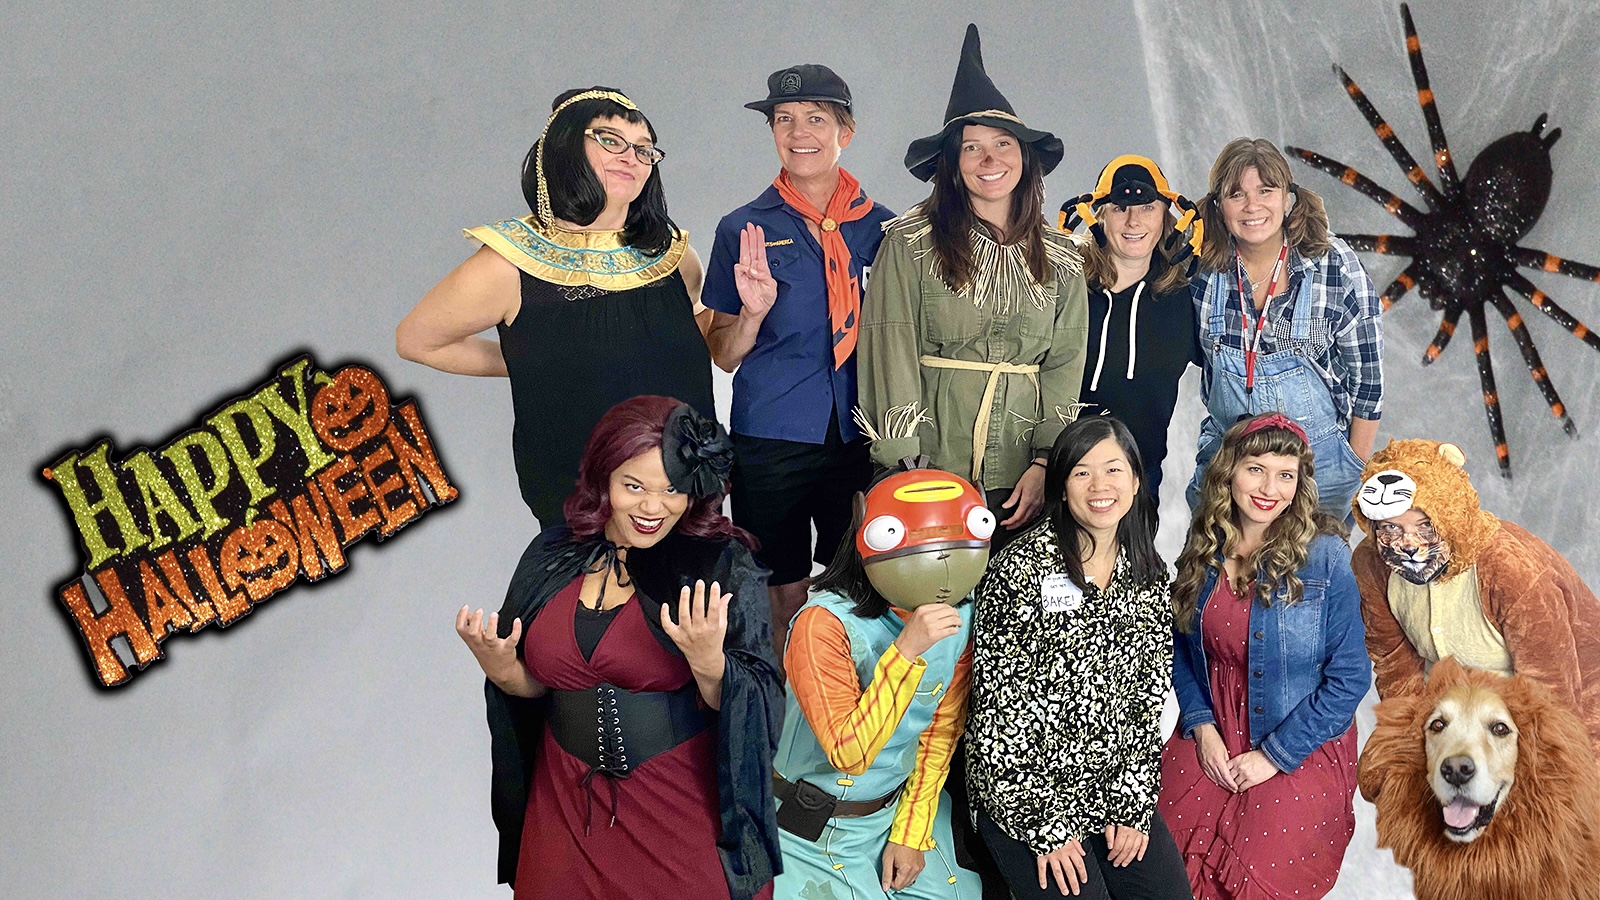 Happy Halloween from Polco. Parties and Employee Engagement.